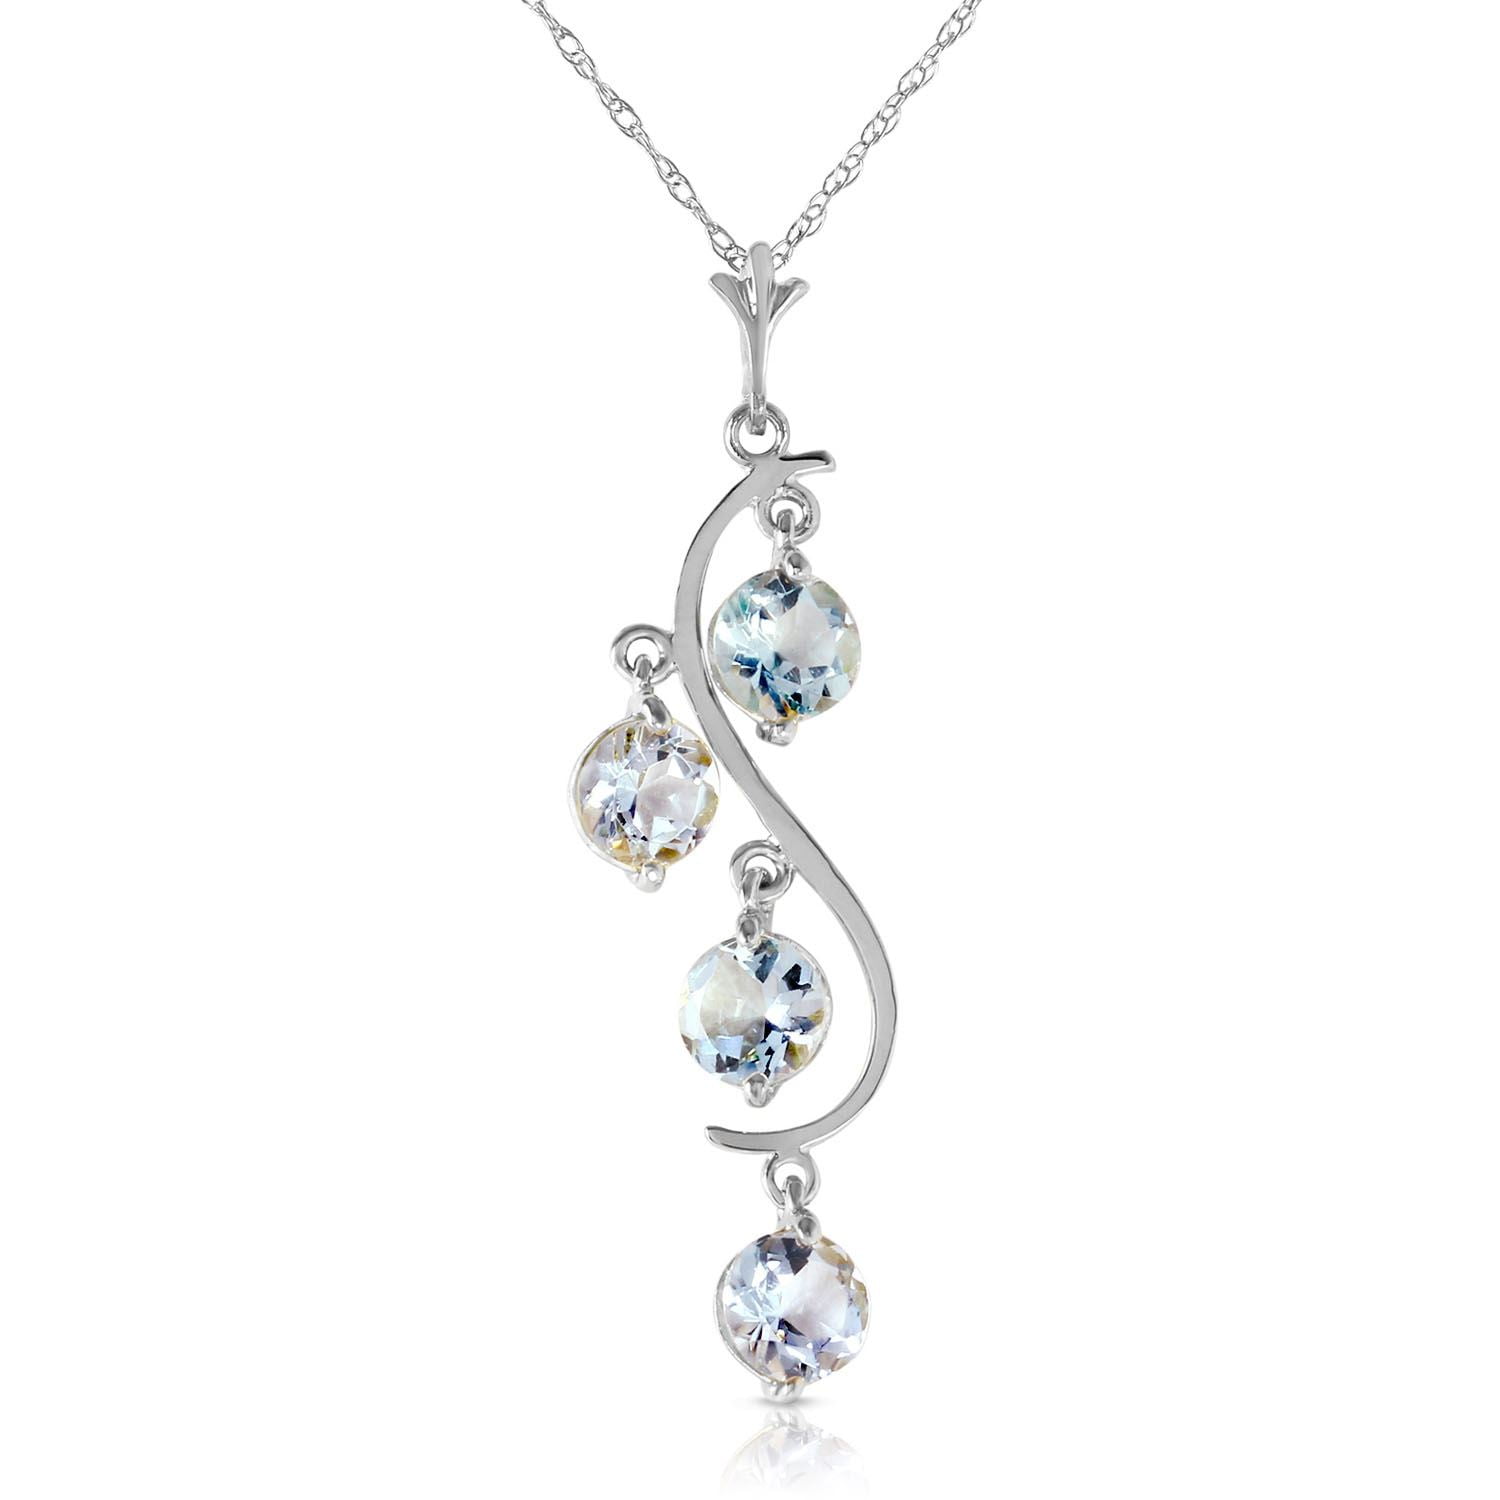 ALARRI 0.25 Carat 14K Solid White Gold Partners In Love Aquamarine Necklace with 22 Inch Chain Length 